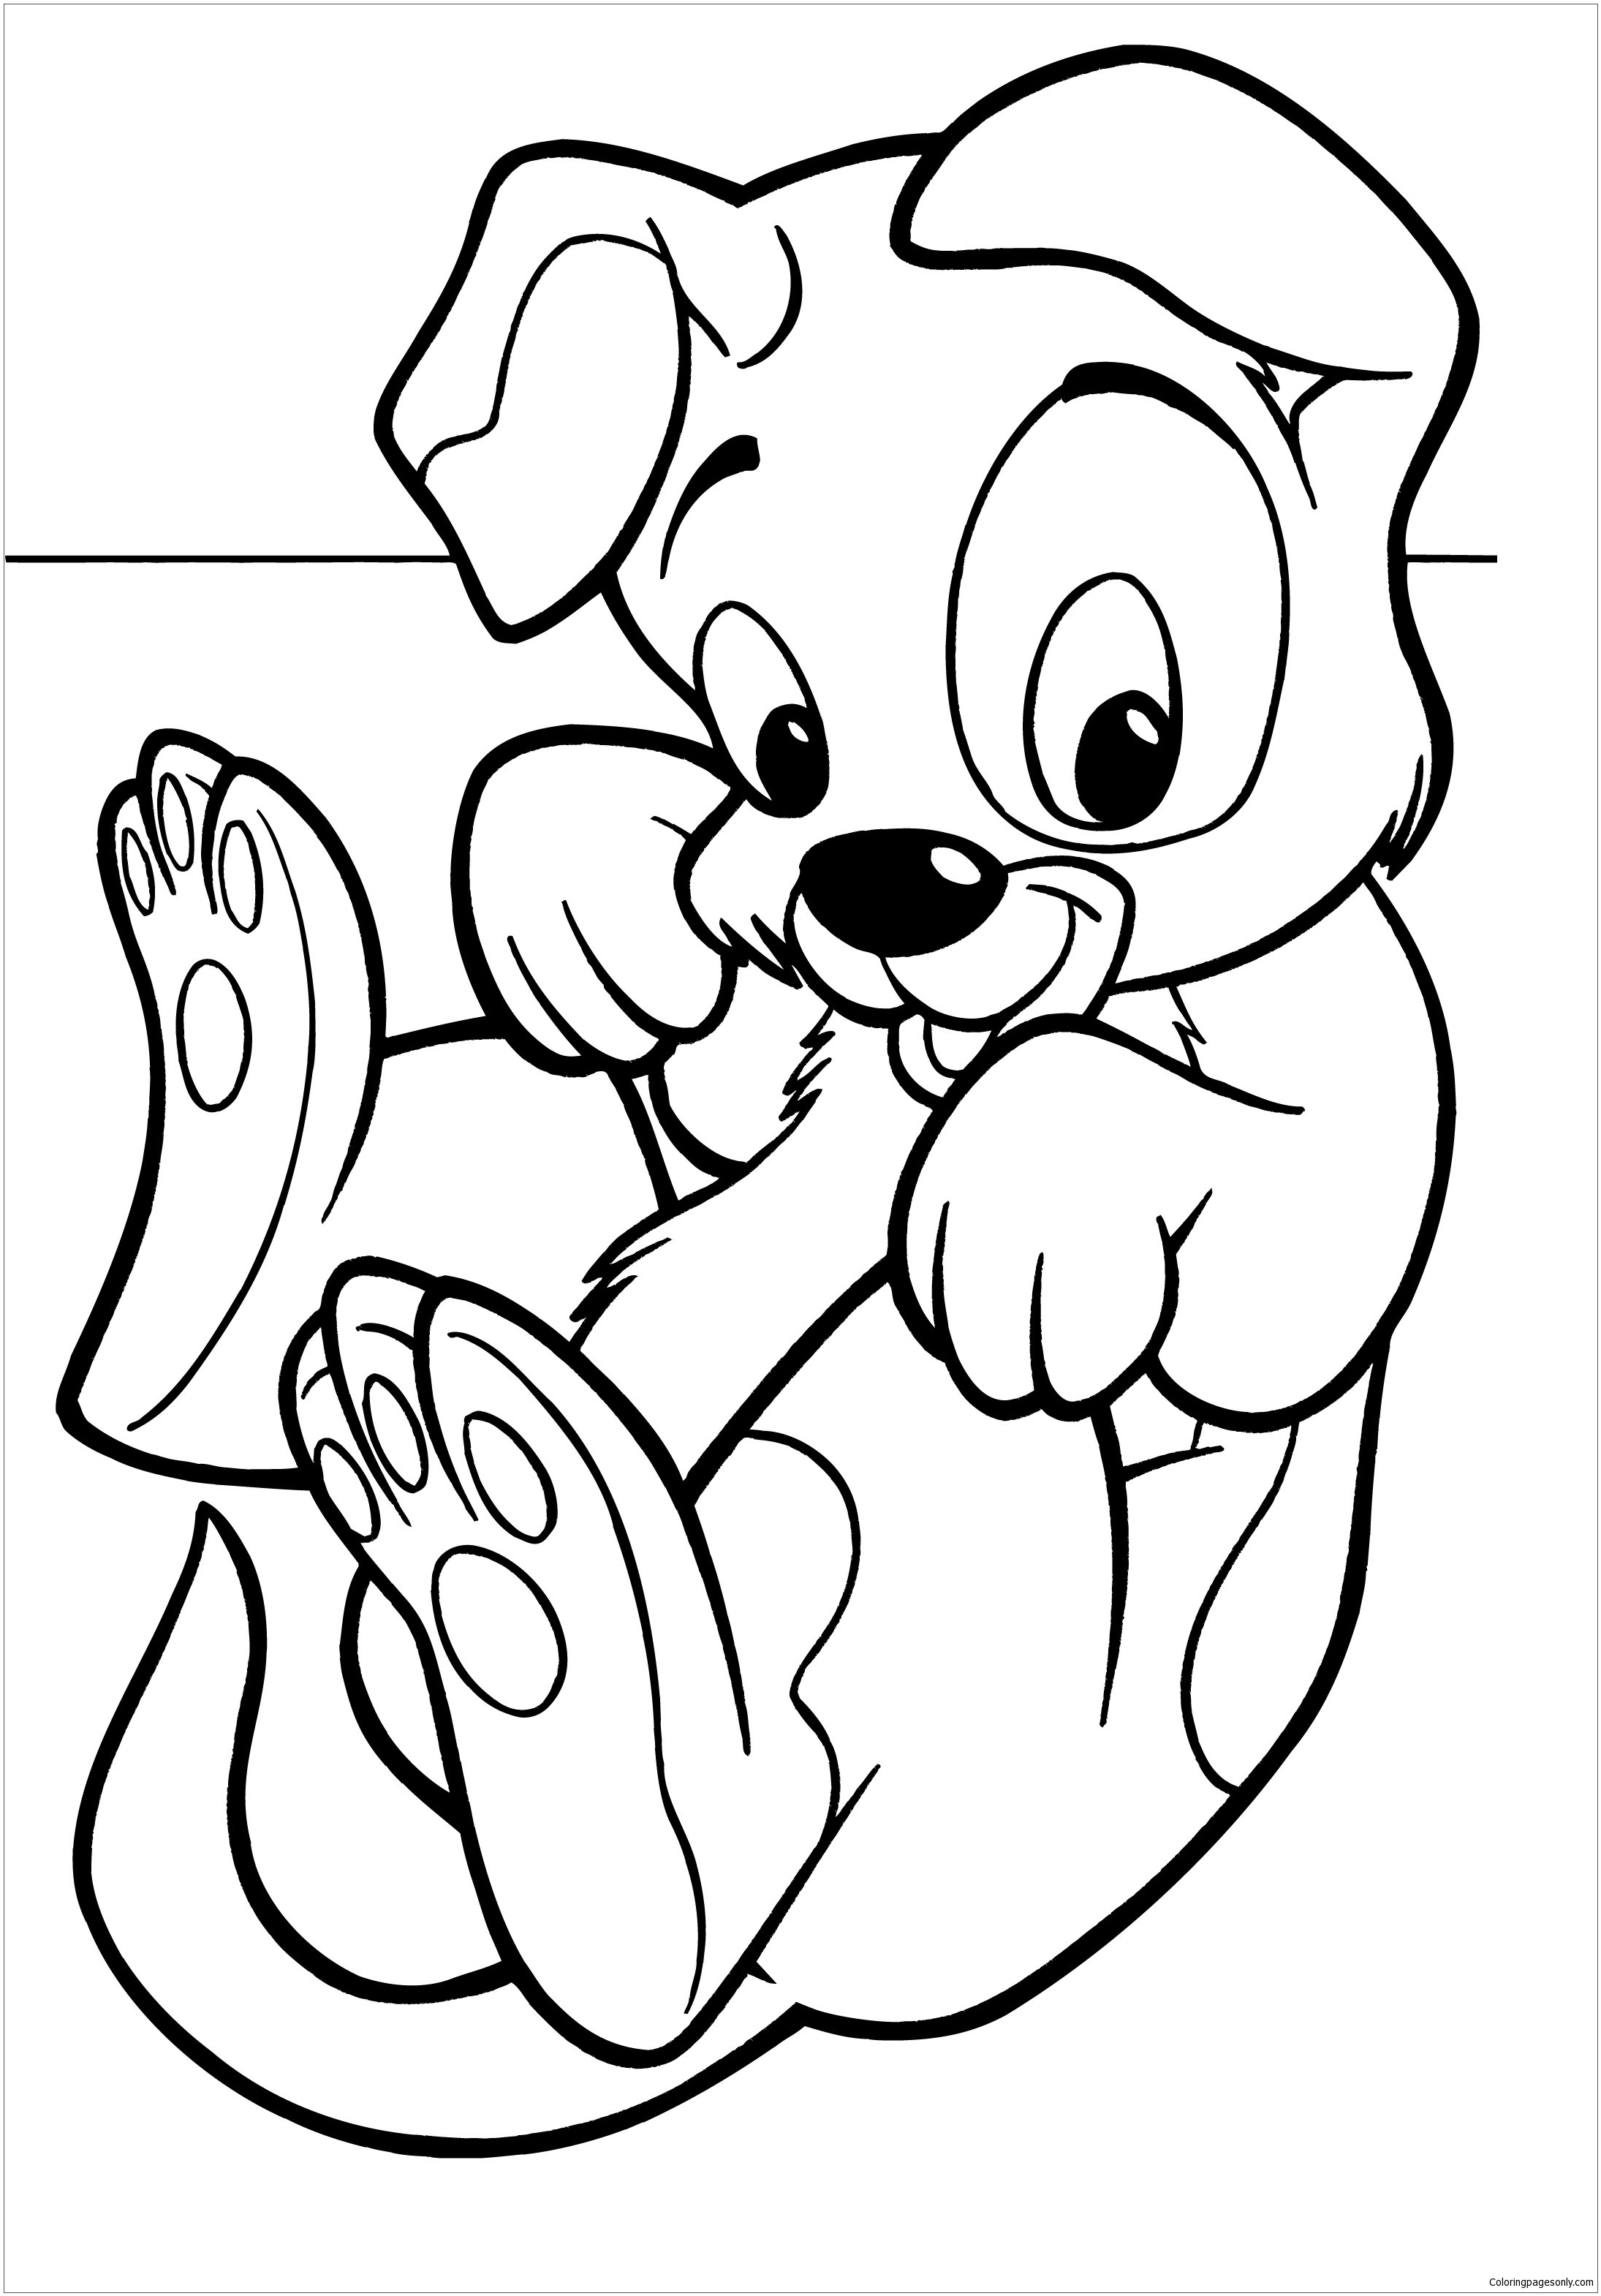 Puppy Cute Printable Coloring Page